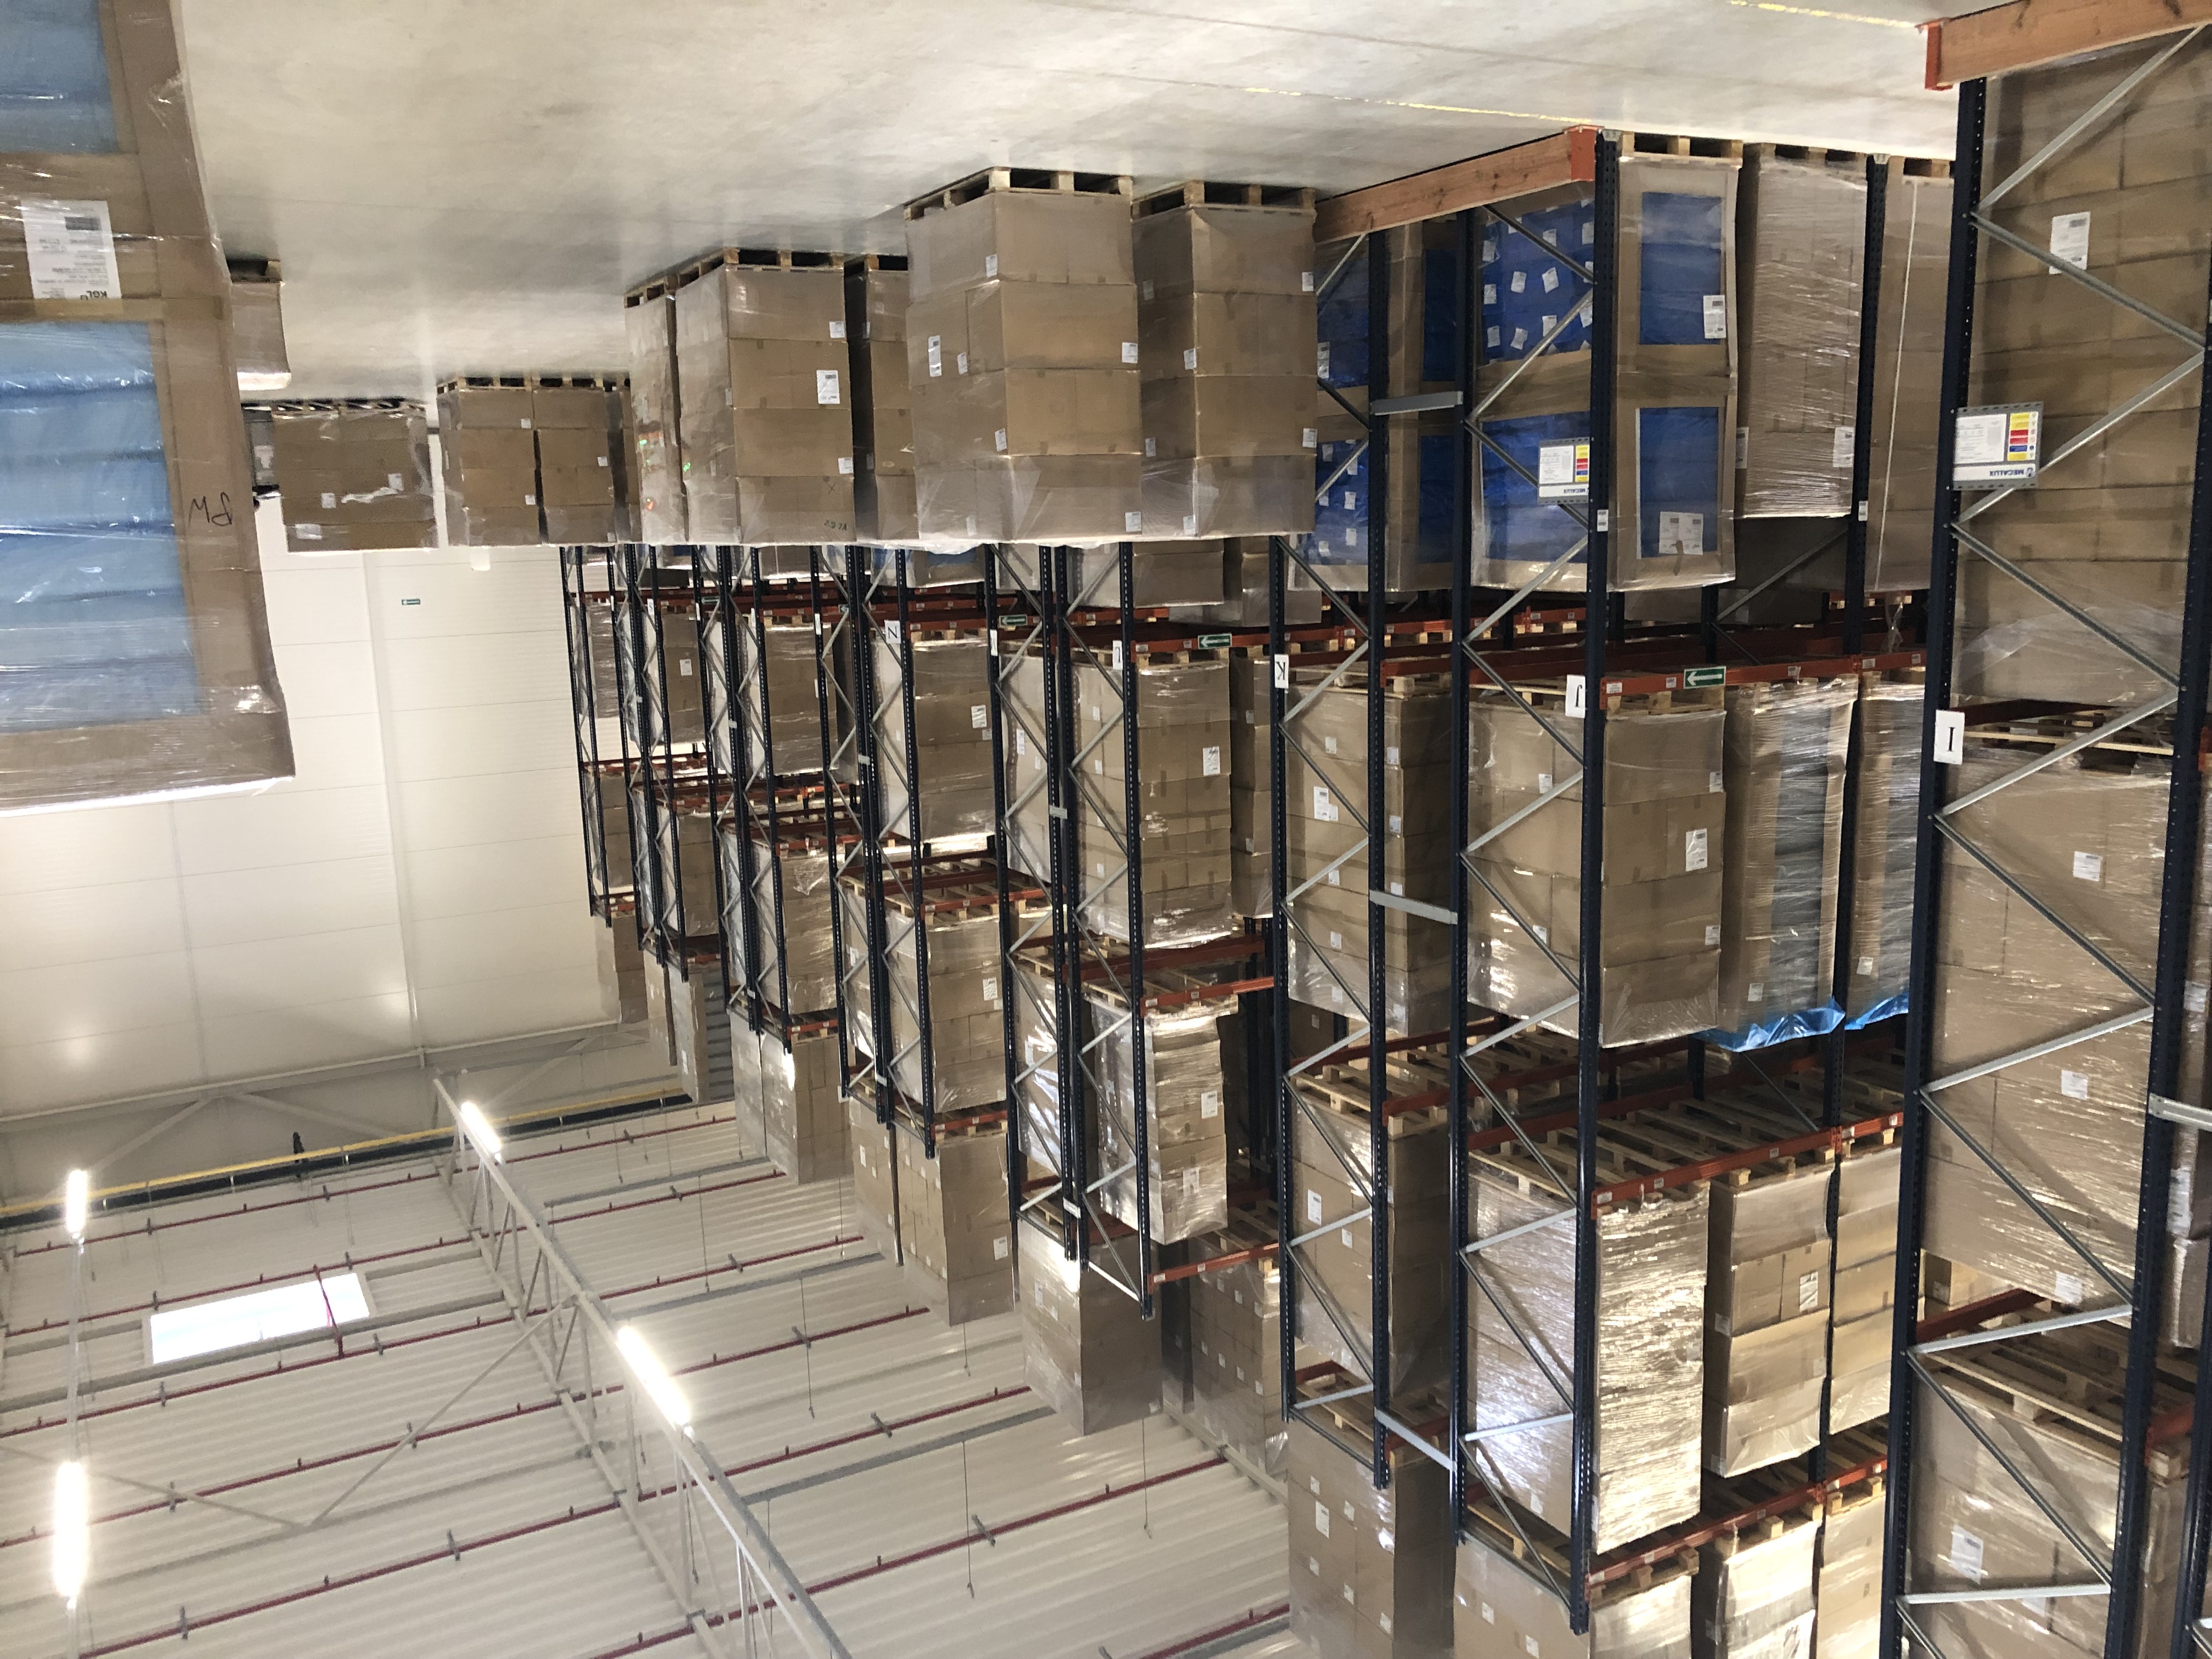 shelving inside a warehouse with boxes stacked